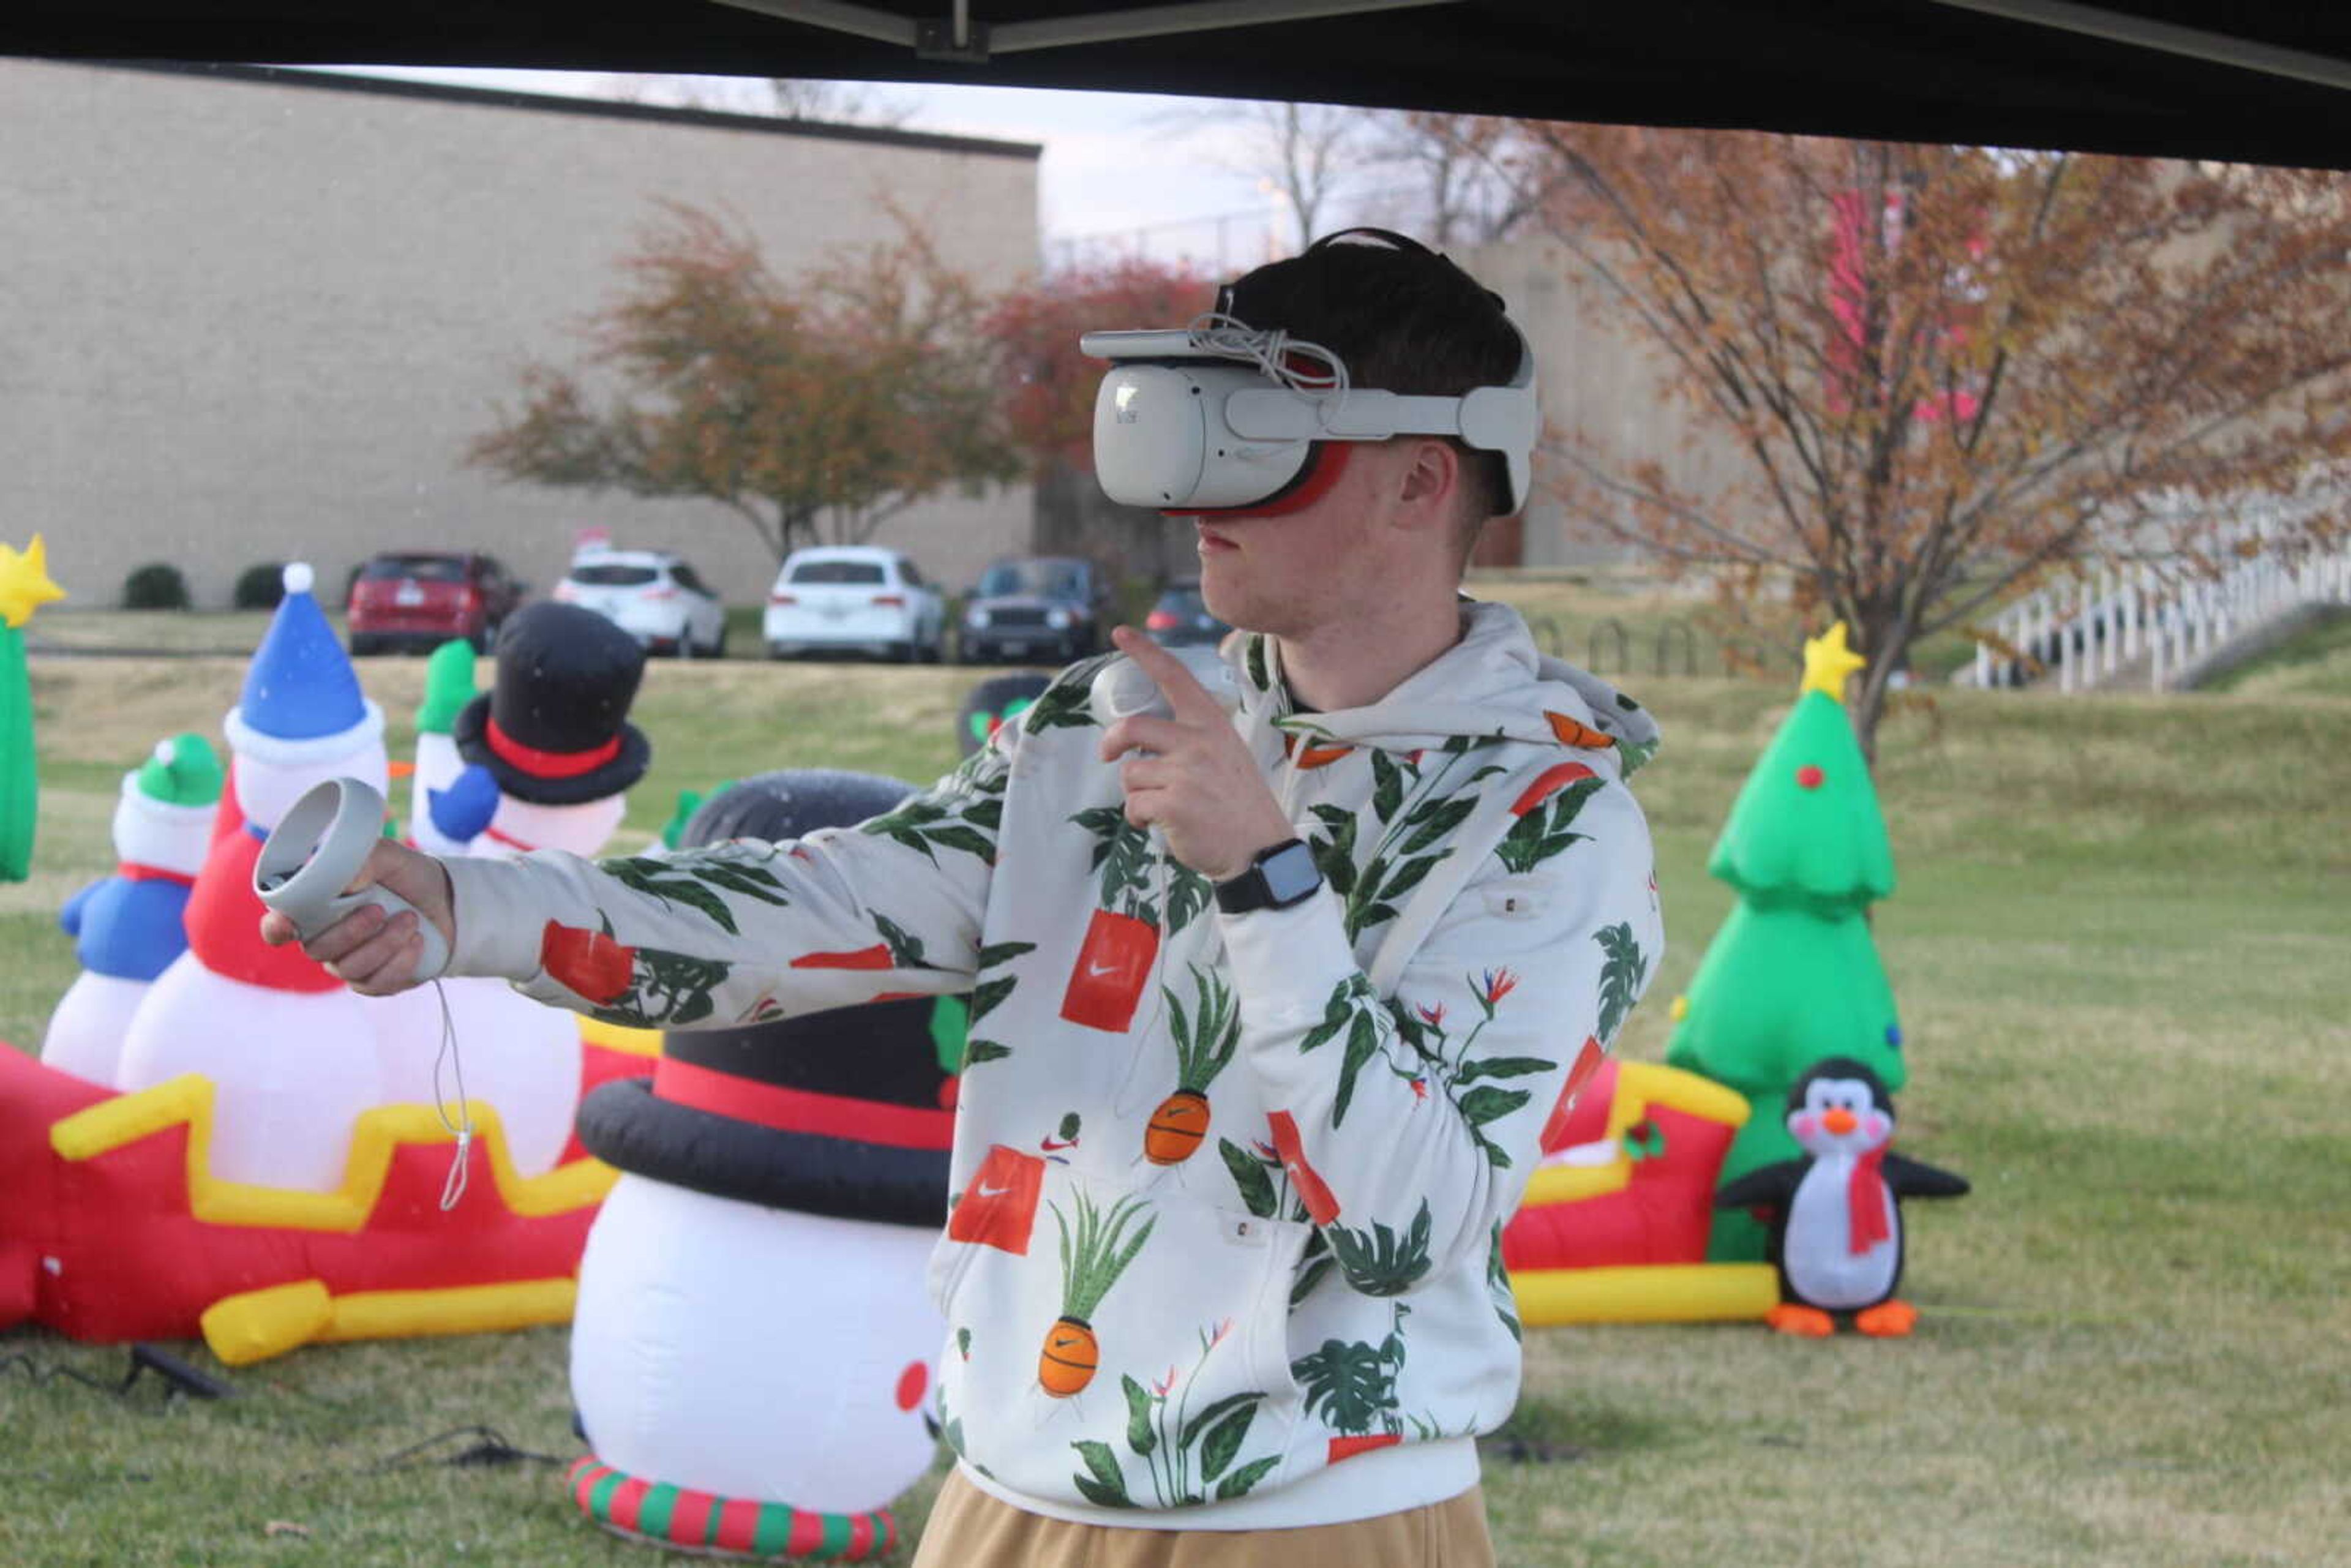 A SEMO student uses a VR headset to participate in a virtual reality snowball fight at Winterfest.